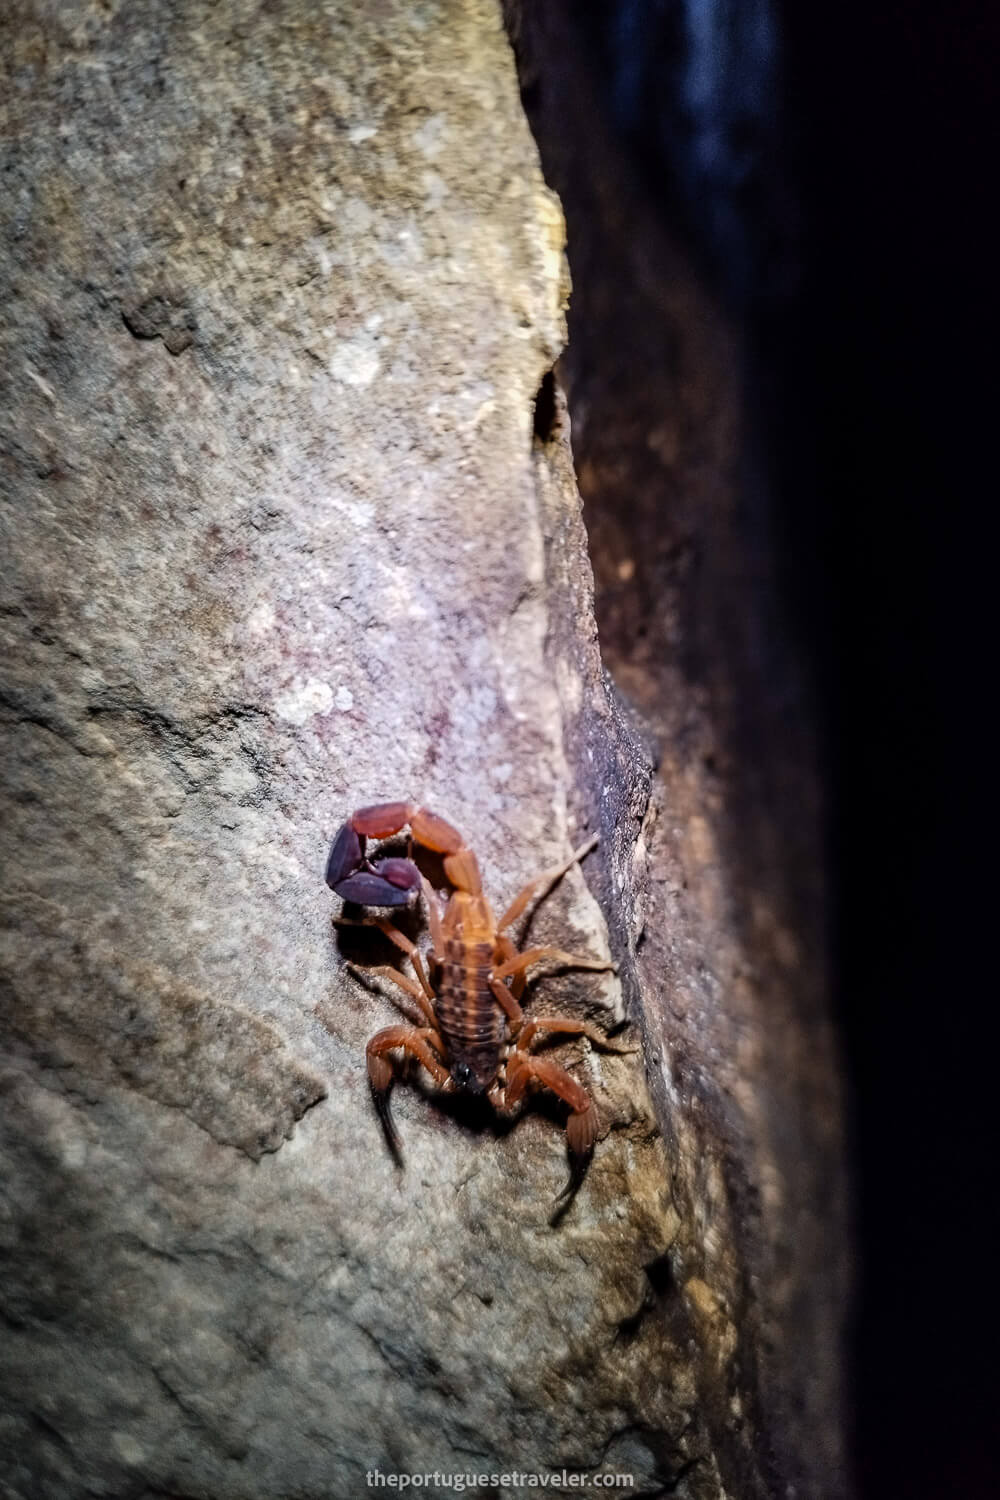 A scorpion inside the cave